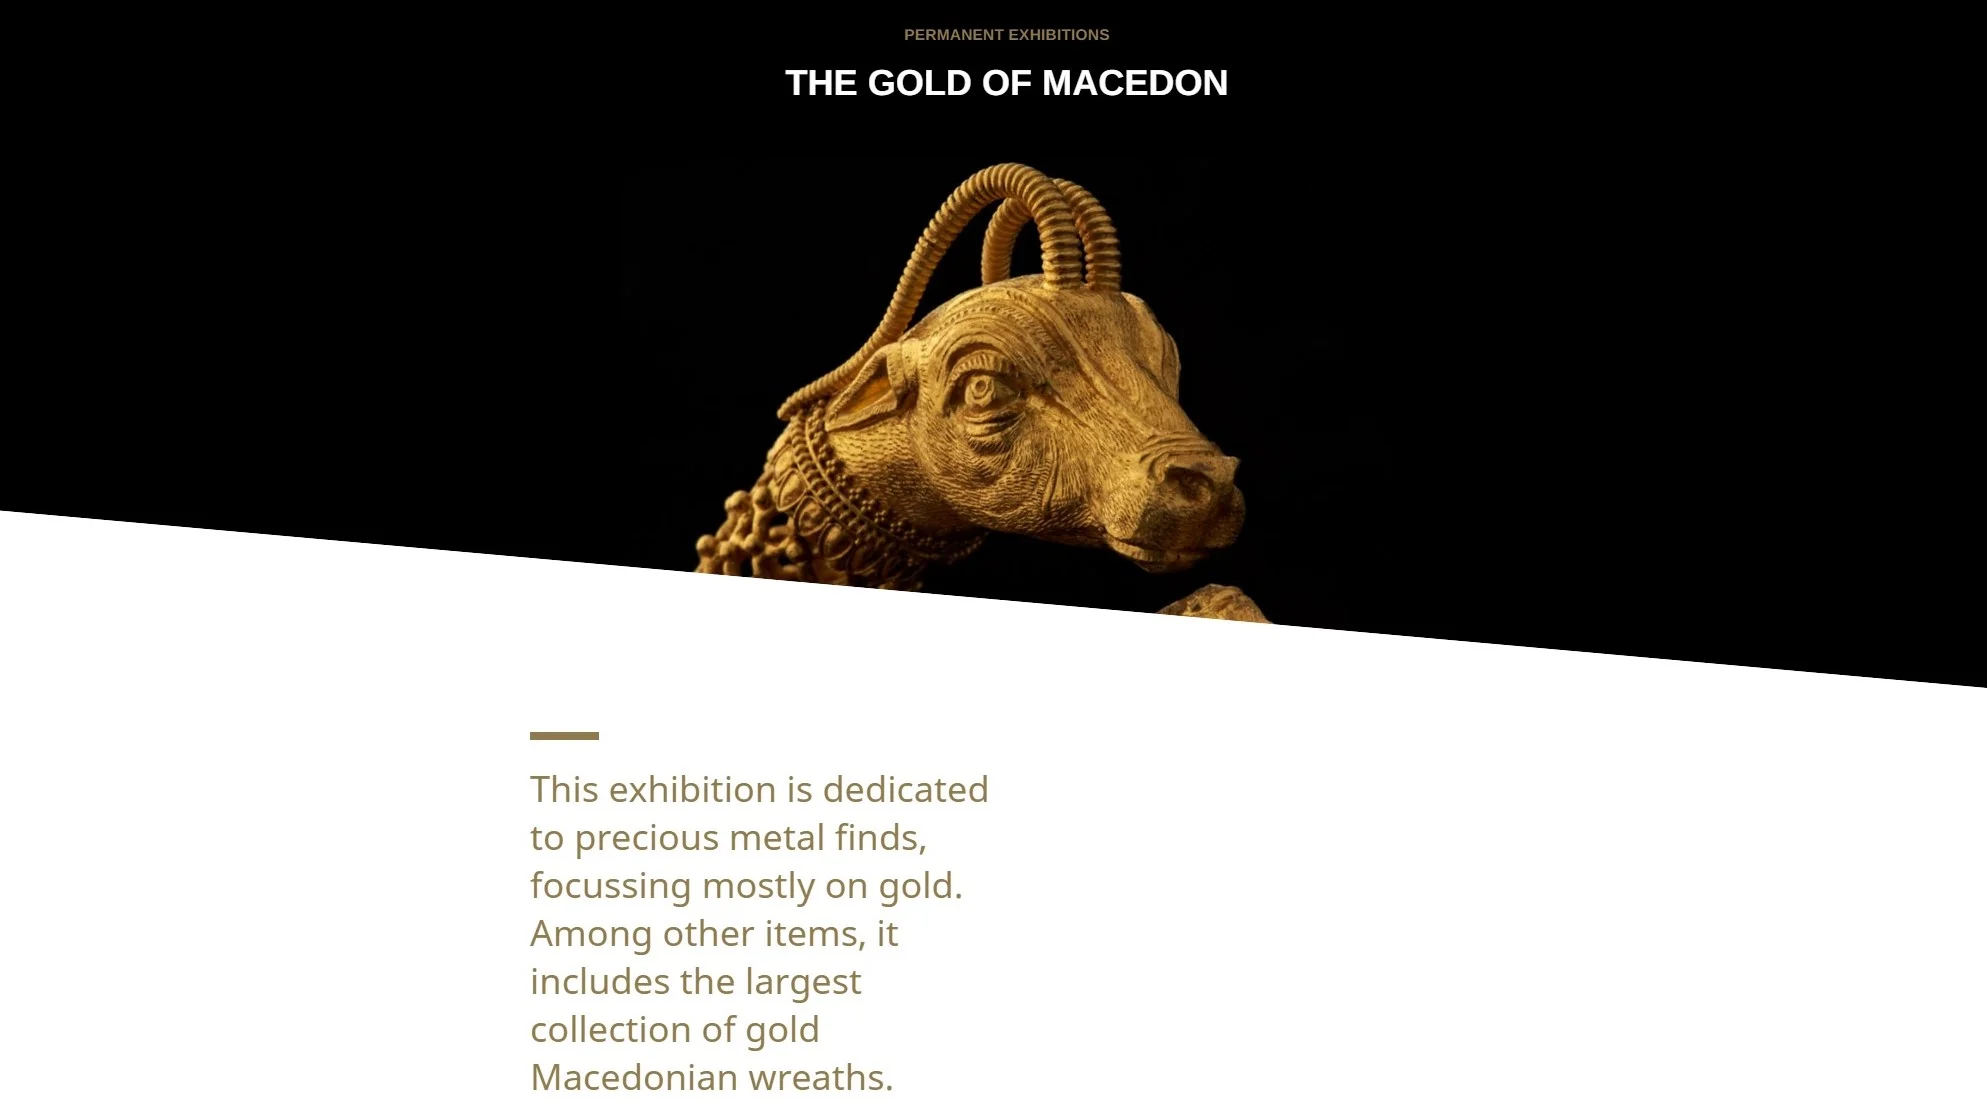 The gold of Macedon, picture from the website of the Archaeological Museum of Thessaloniki